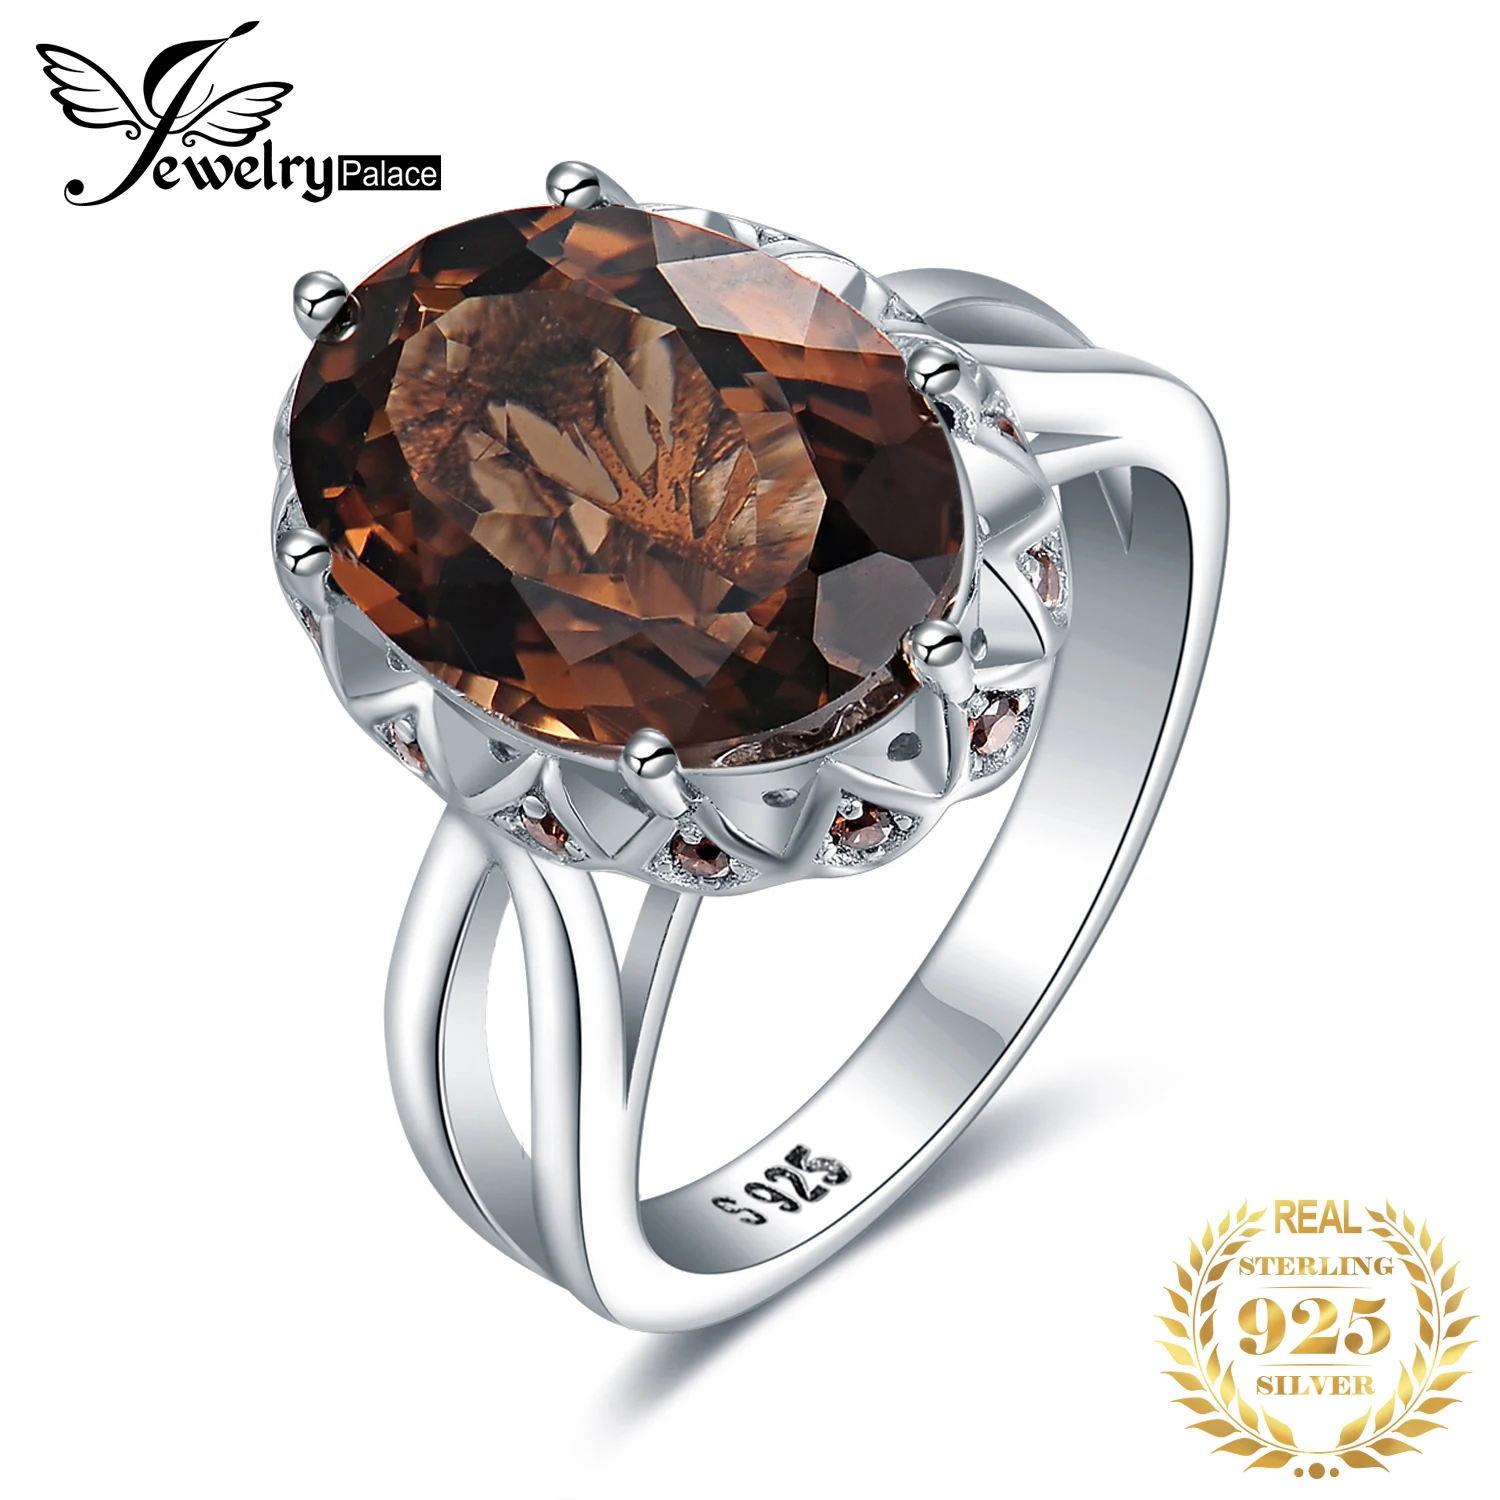 

JewelryPalace Large 5.7ct Genuine Oval Smoky Quartz 925 Sterling Silver Big Gemstone Cocktail Statement Rings for Women Jewelry